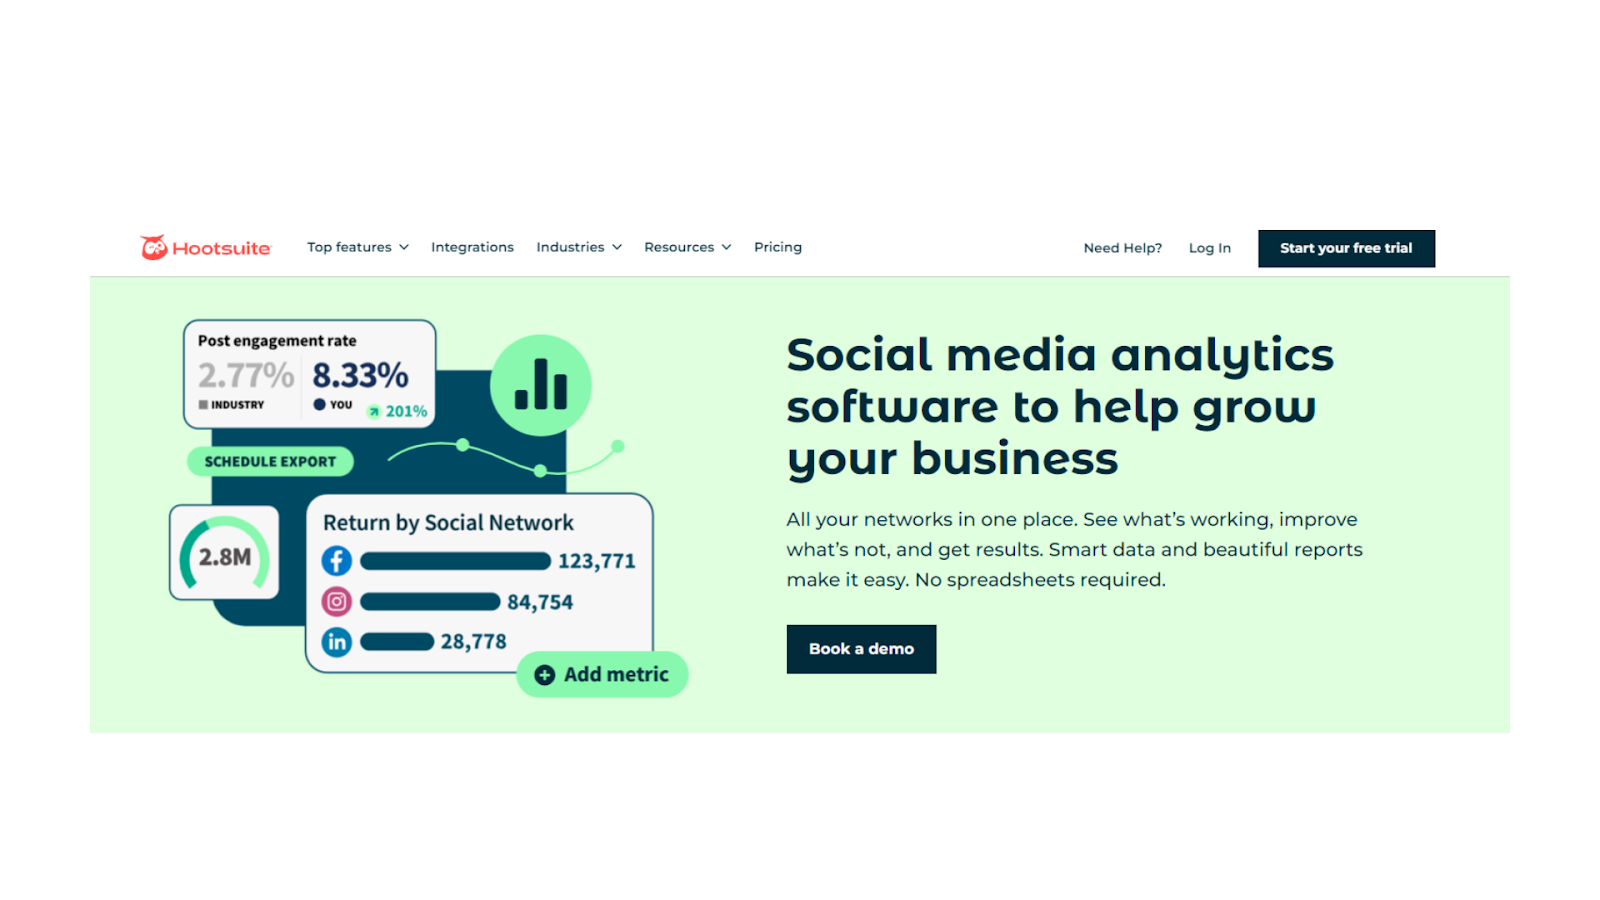 SaaS marketing audit tools #2 - manage and track social media activity across different platforms with Hootsuite (HS). Don't miss the other 3 tools in the full SaaS marketing audit 101 guide.